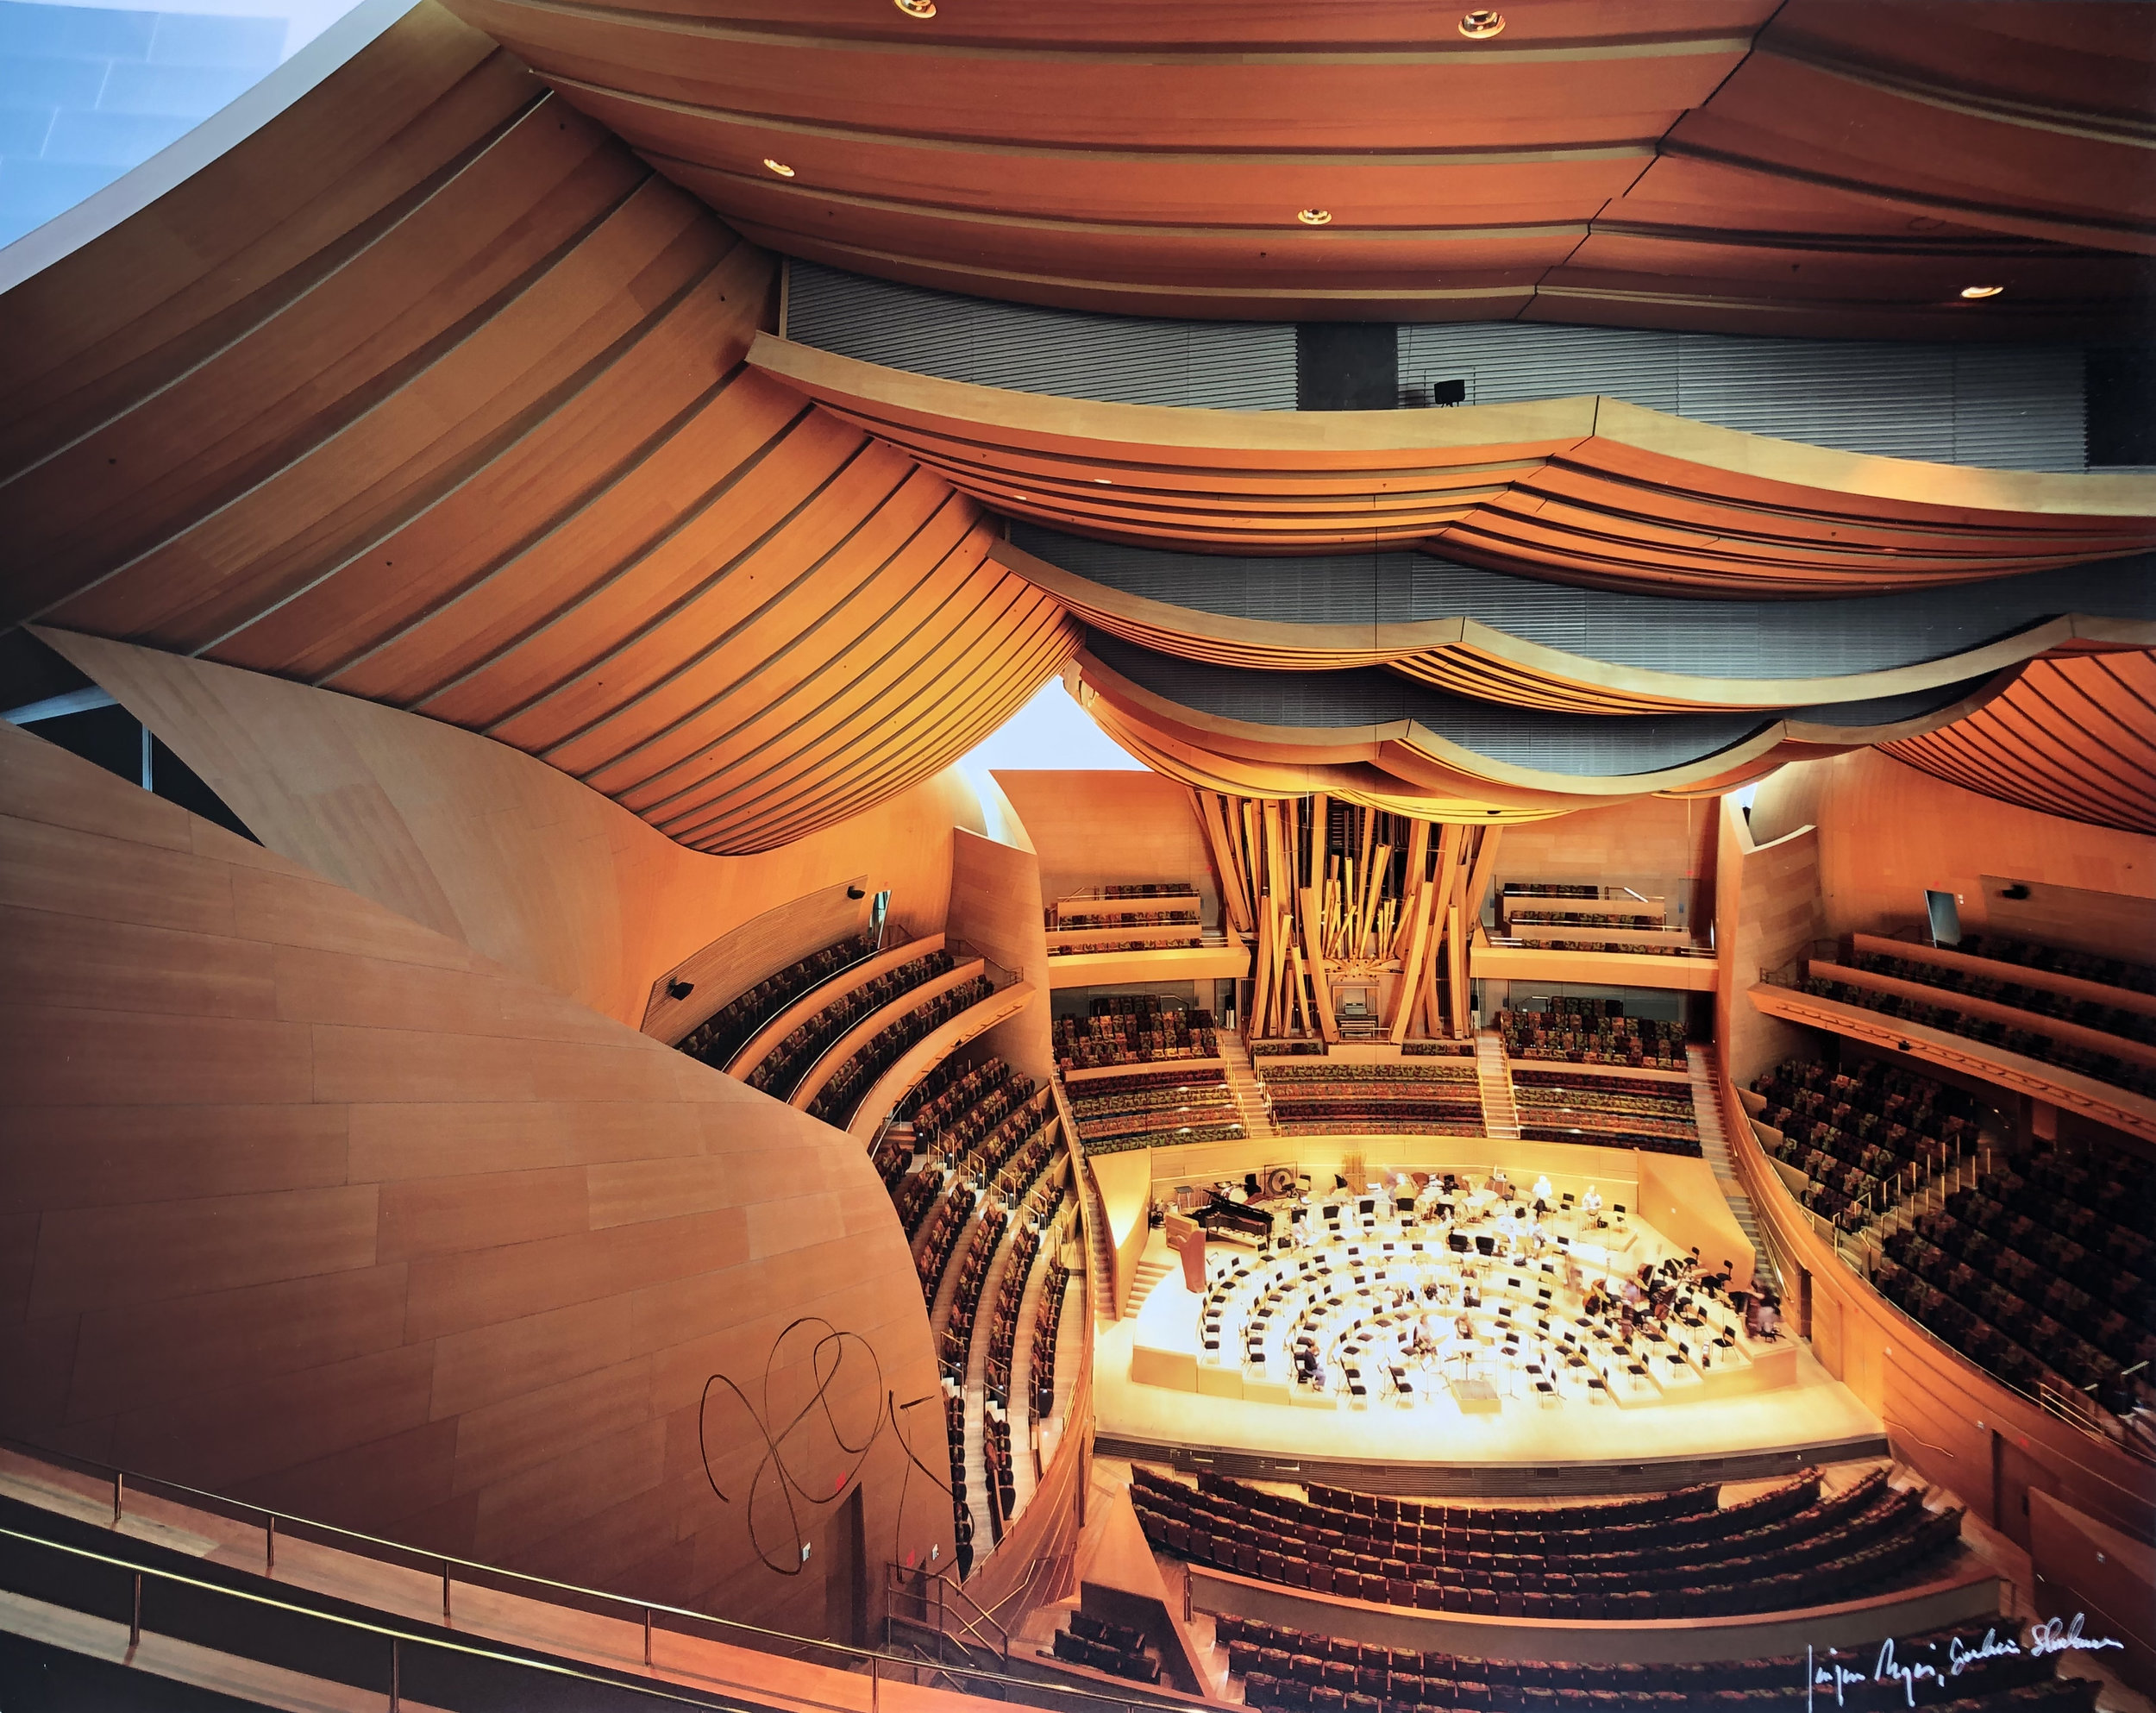 Walt Disney Concert Hall Interior View Limited Edition Photograph Signed By Julius Shulman And Juergen Nogai With Frank Gehry Signature Option